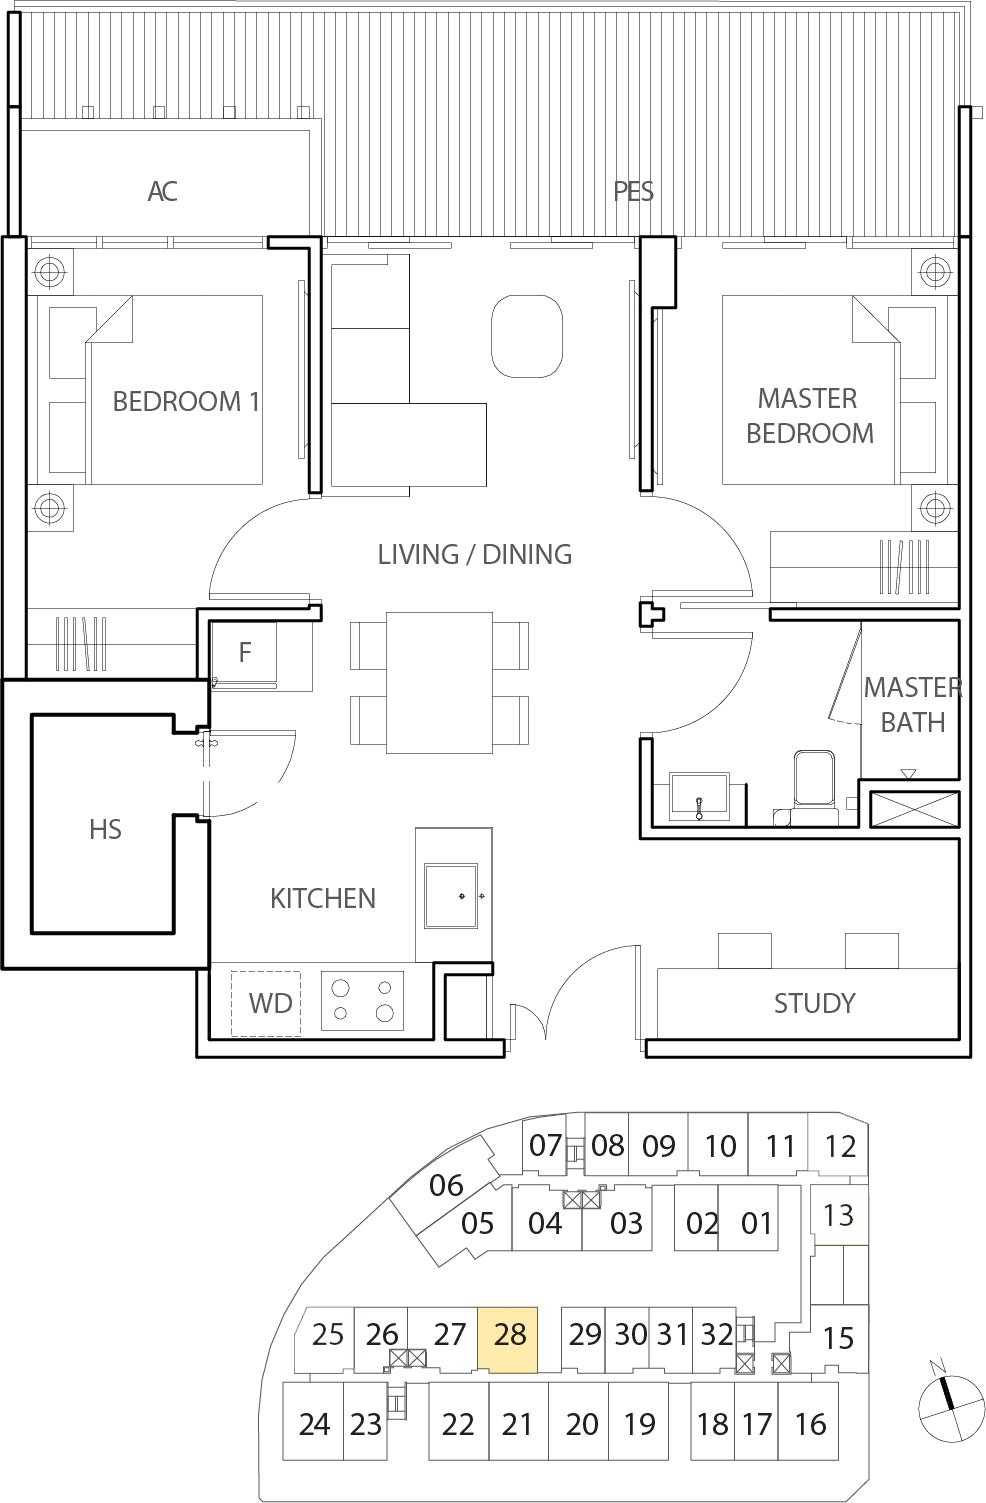 Floor Plan for Residential Type eB2-a